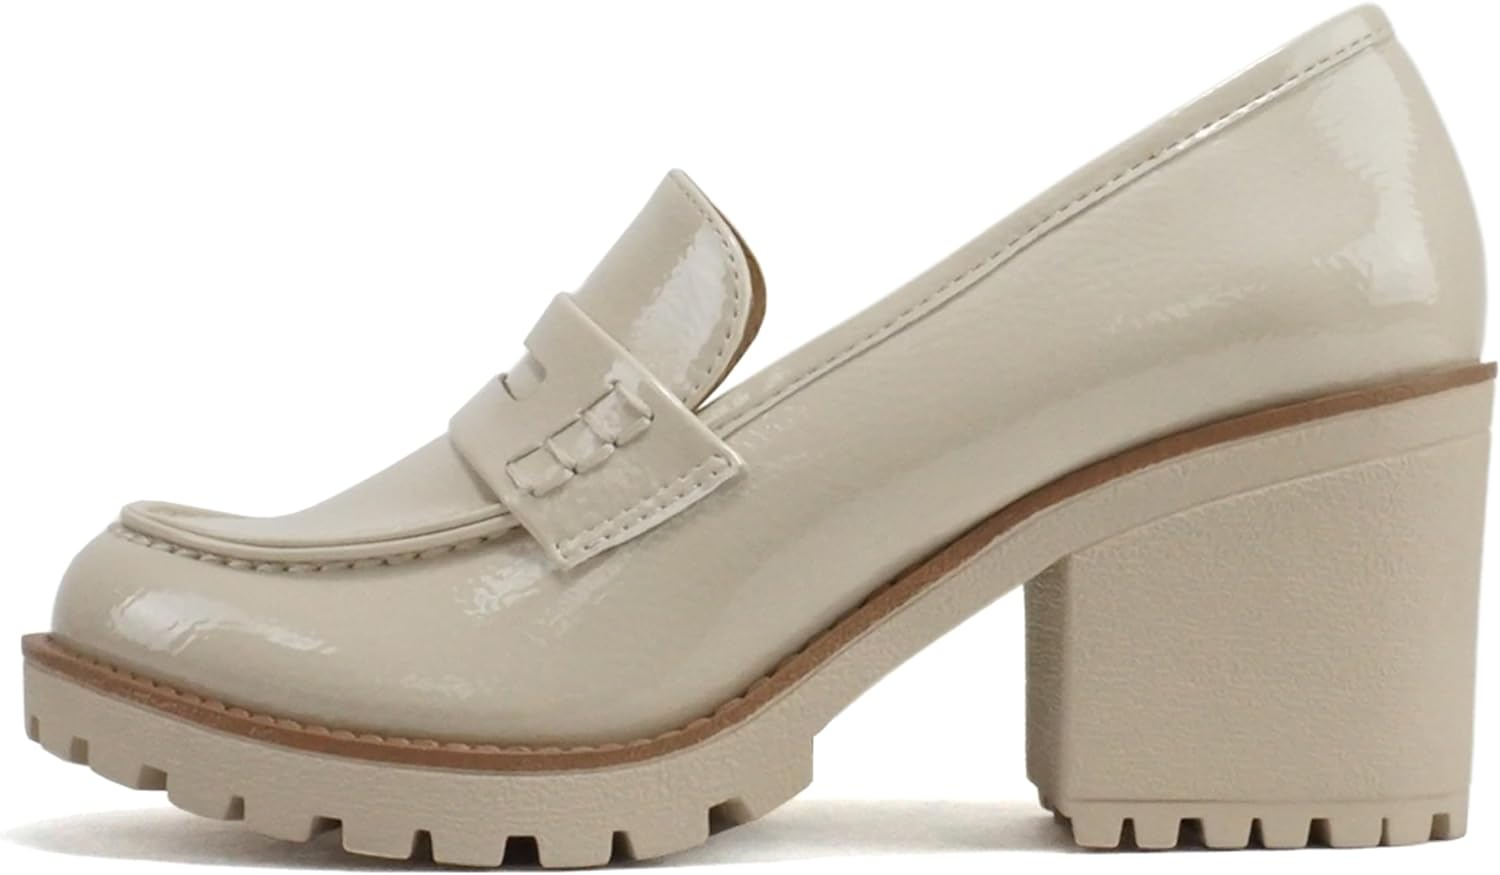 “Kinder” ~ Women Slip On Chunky Mid Heel Lug Sole Penny Loafer Shoe envelope clutch delivers chic style for dinner or a date in luxe faux leather with a jewelry-like chain strap.